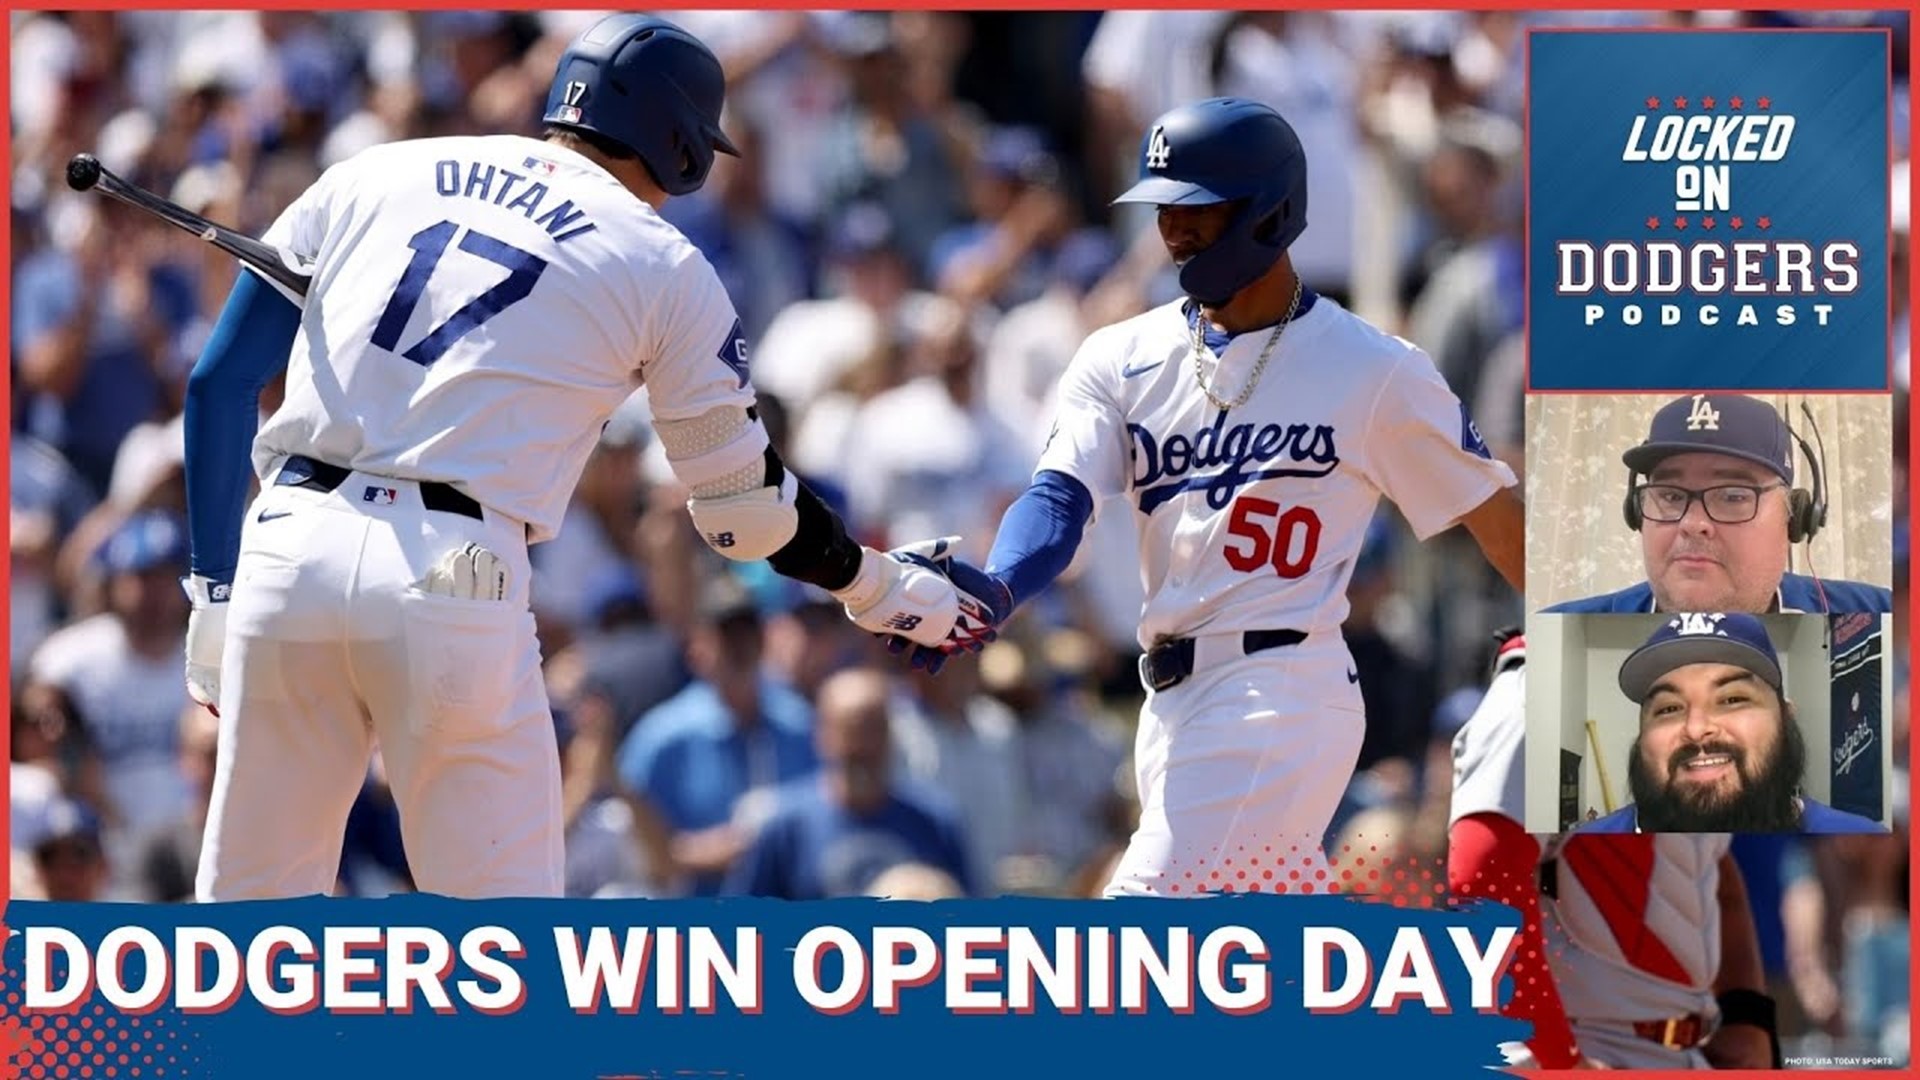 The Dodgers won on Opening Day behind the strength of their 'Big 3' on offense, as Mookie Betts and Freddie Freeman both homered